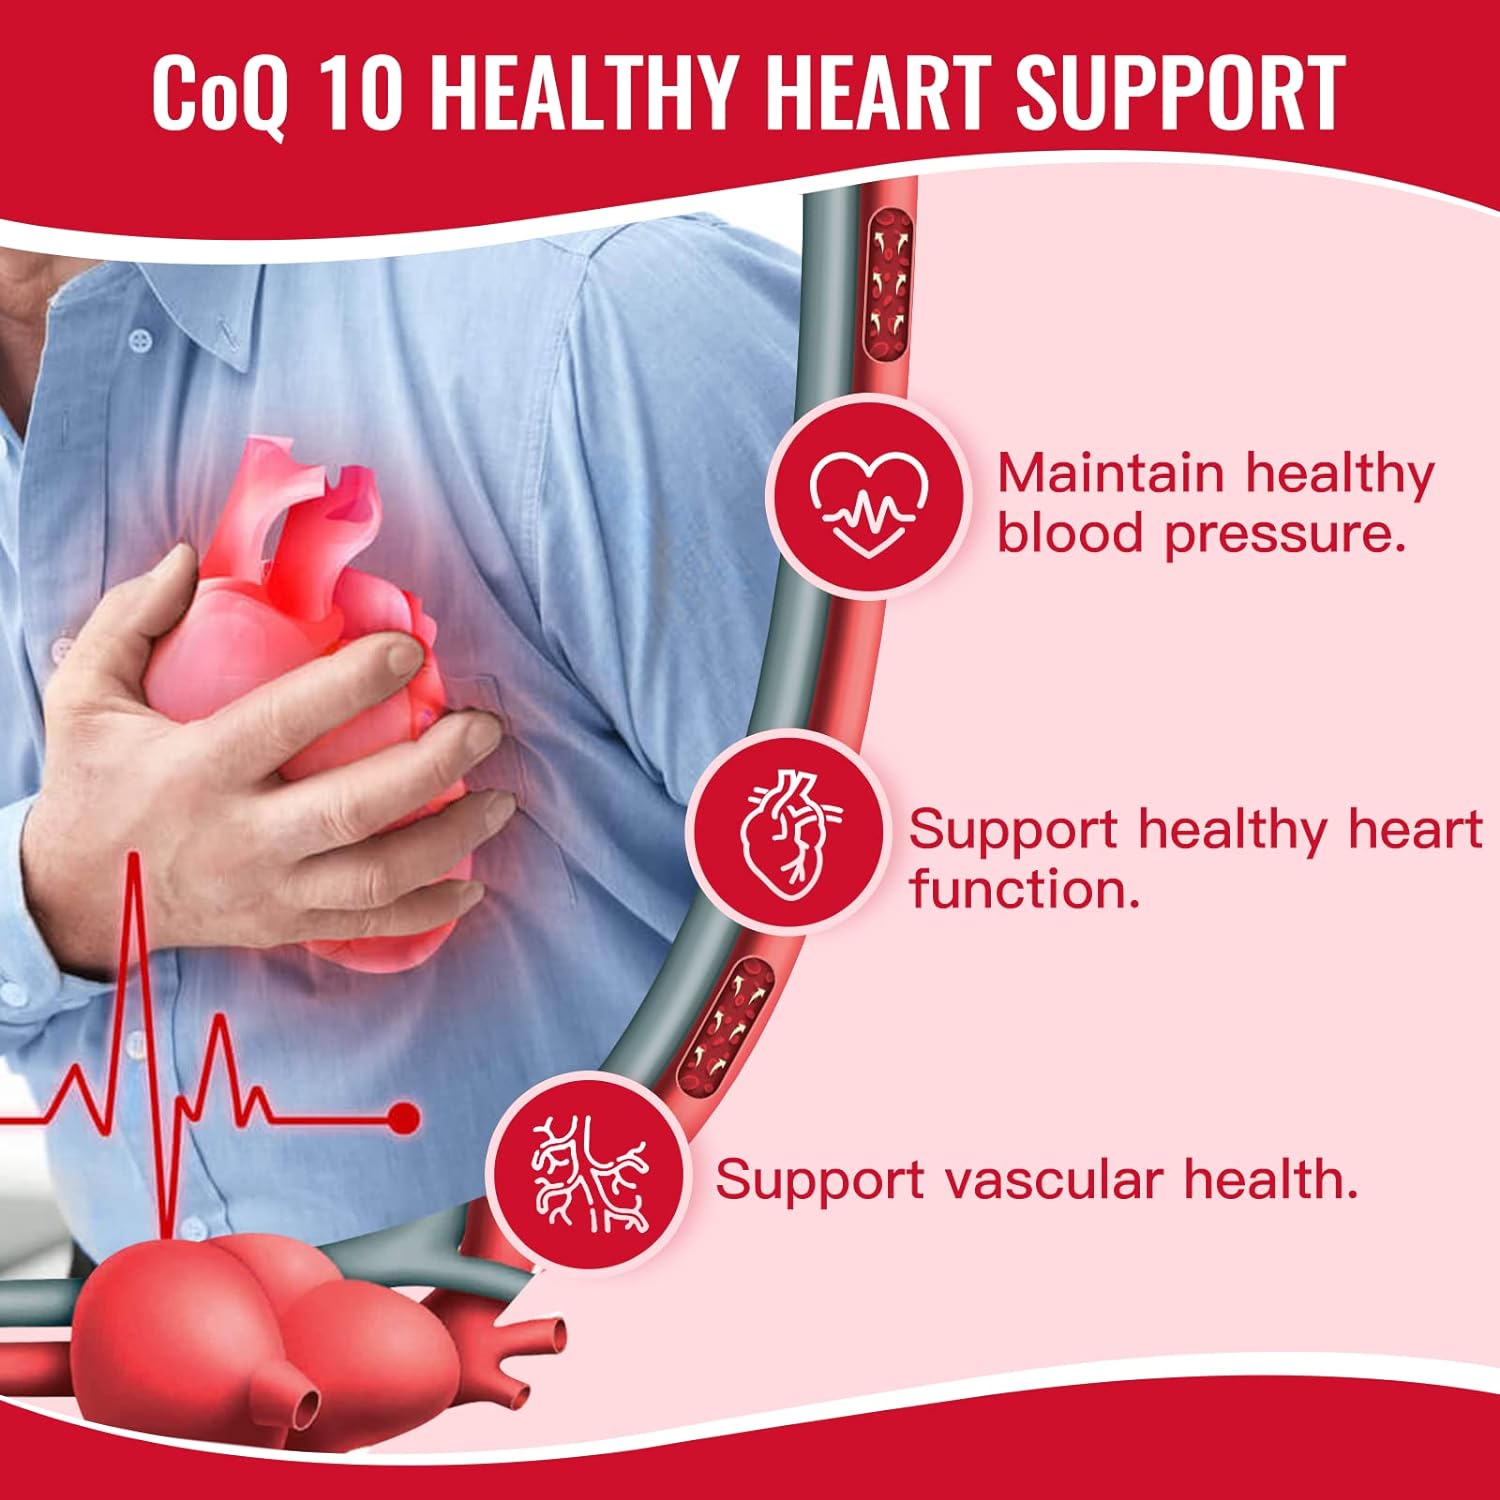 Co0 10 HEALTHY HEART SUPPORT